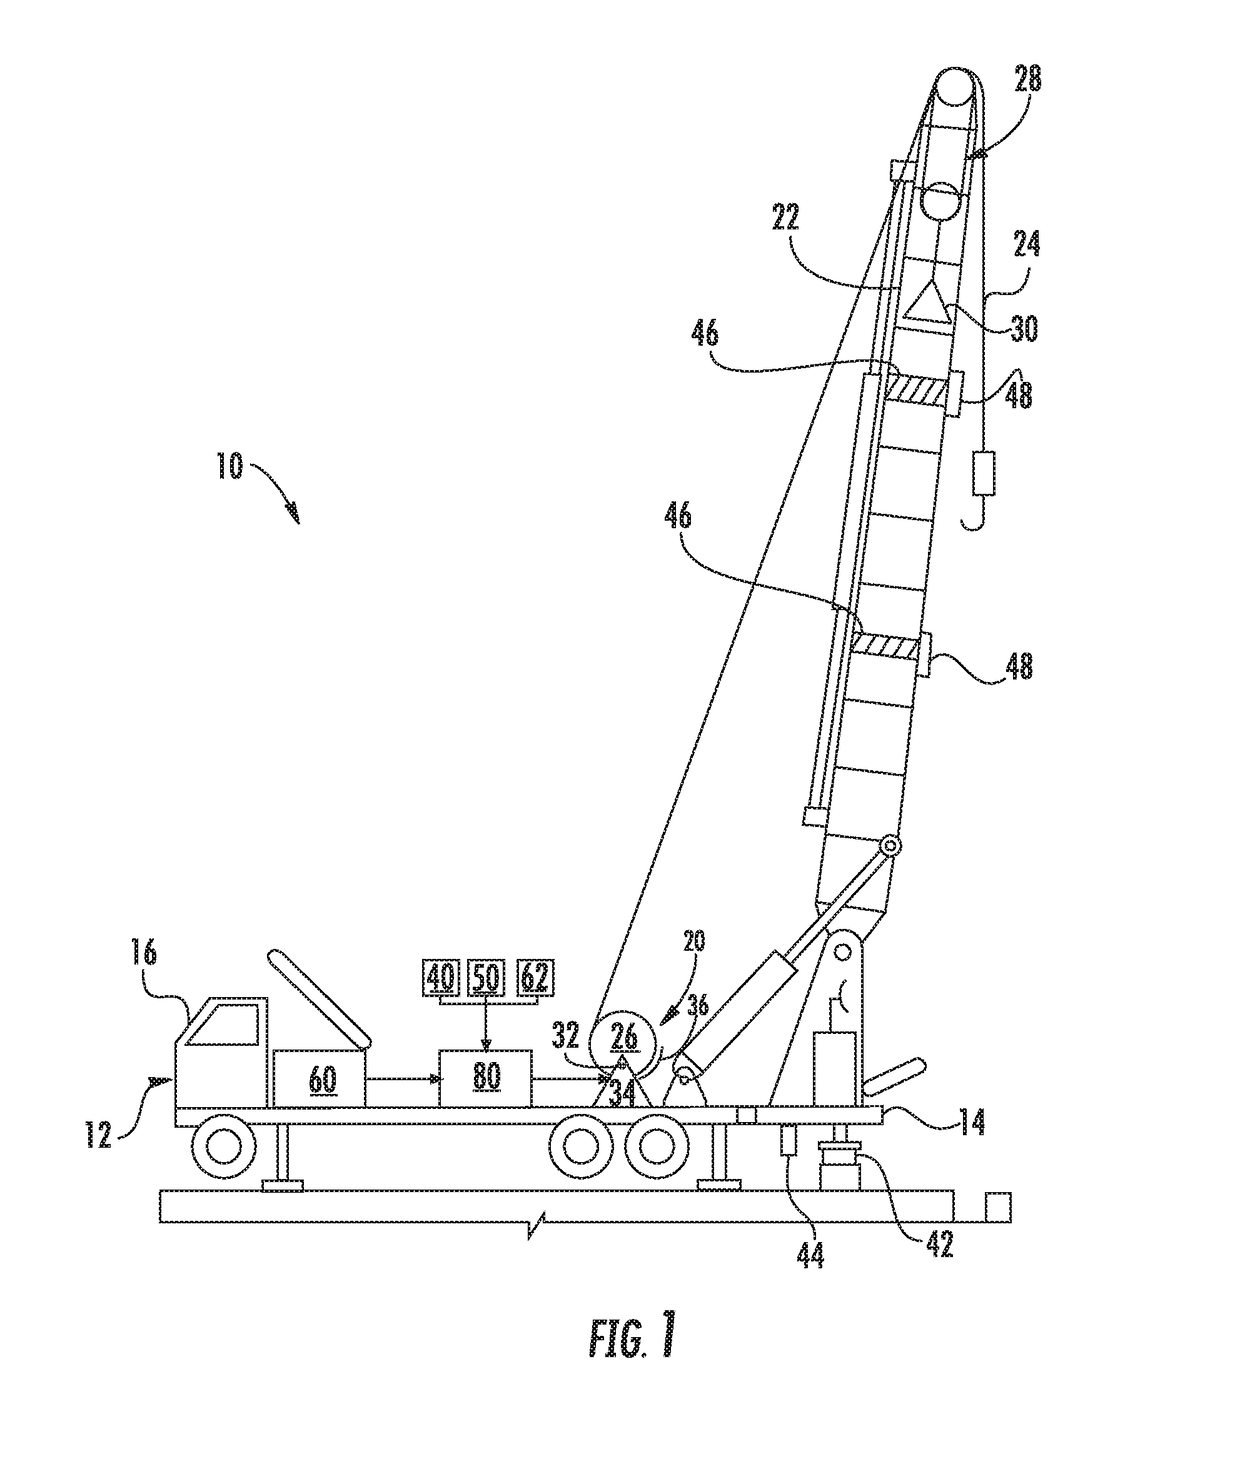 Drill rig and method for operating a drill rig